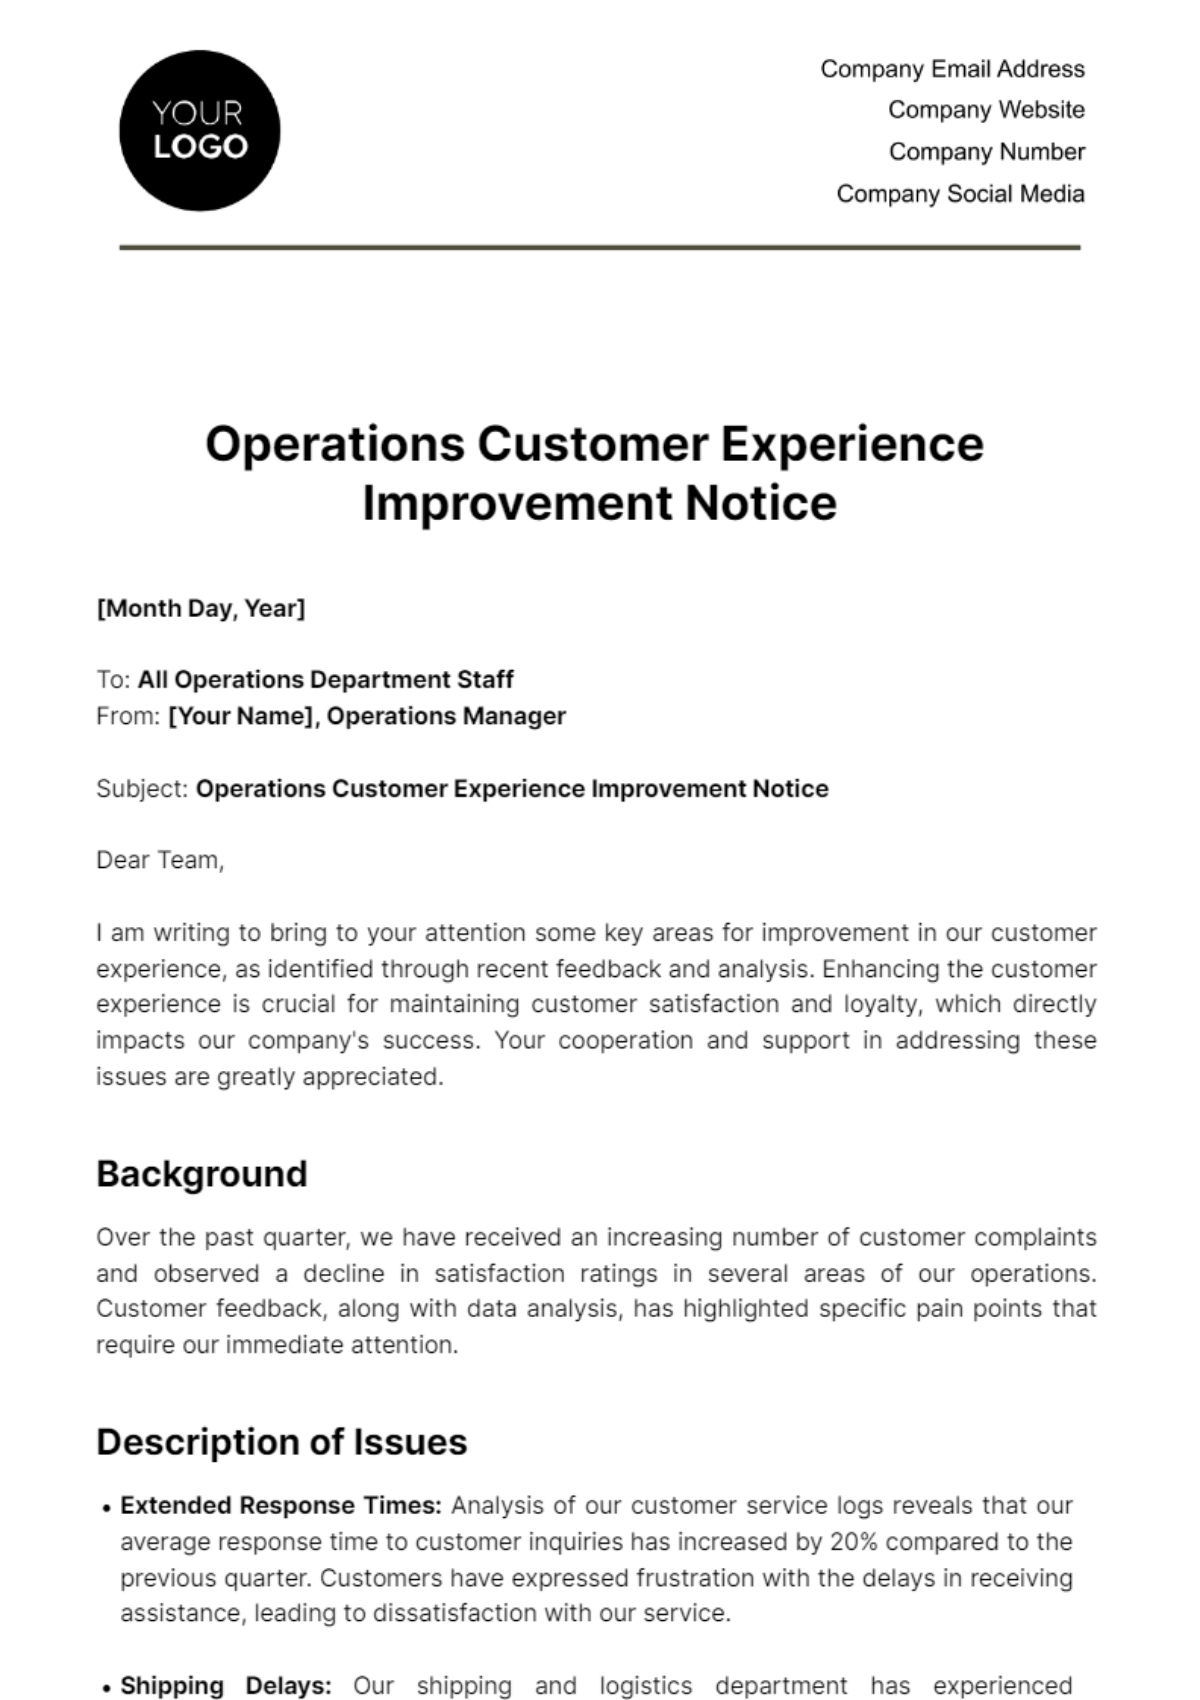 Operations Customer Experience Improvement Notice Template